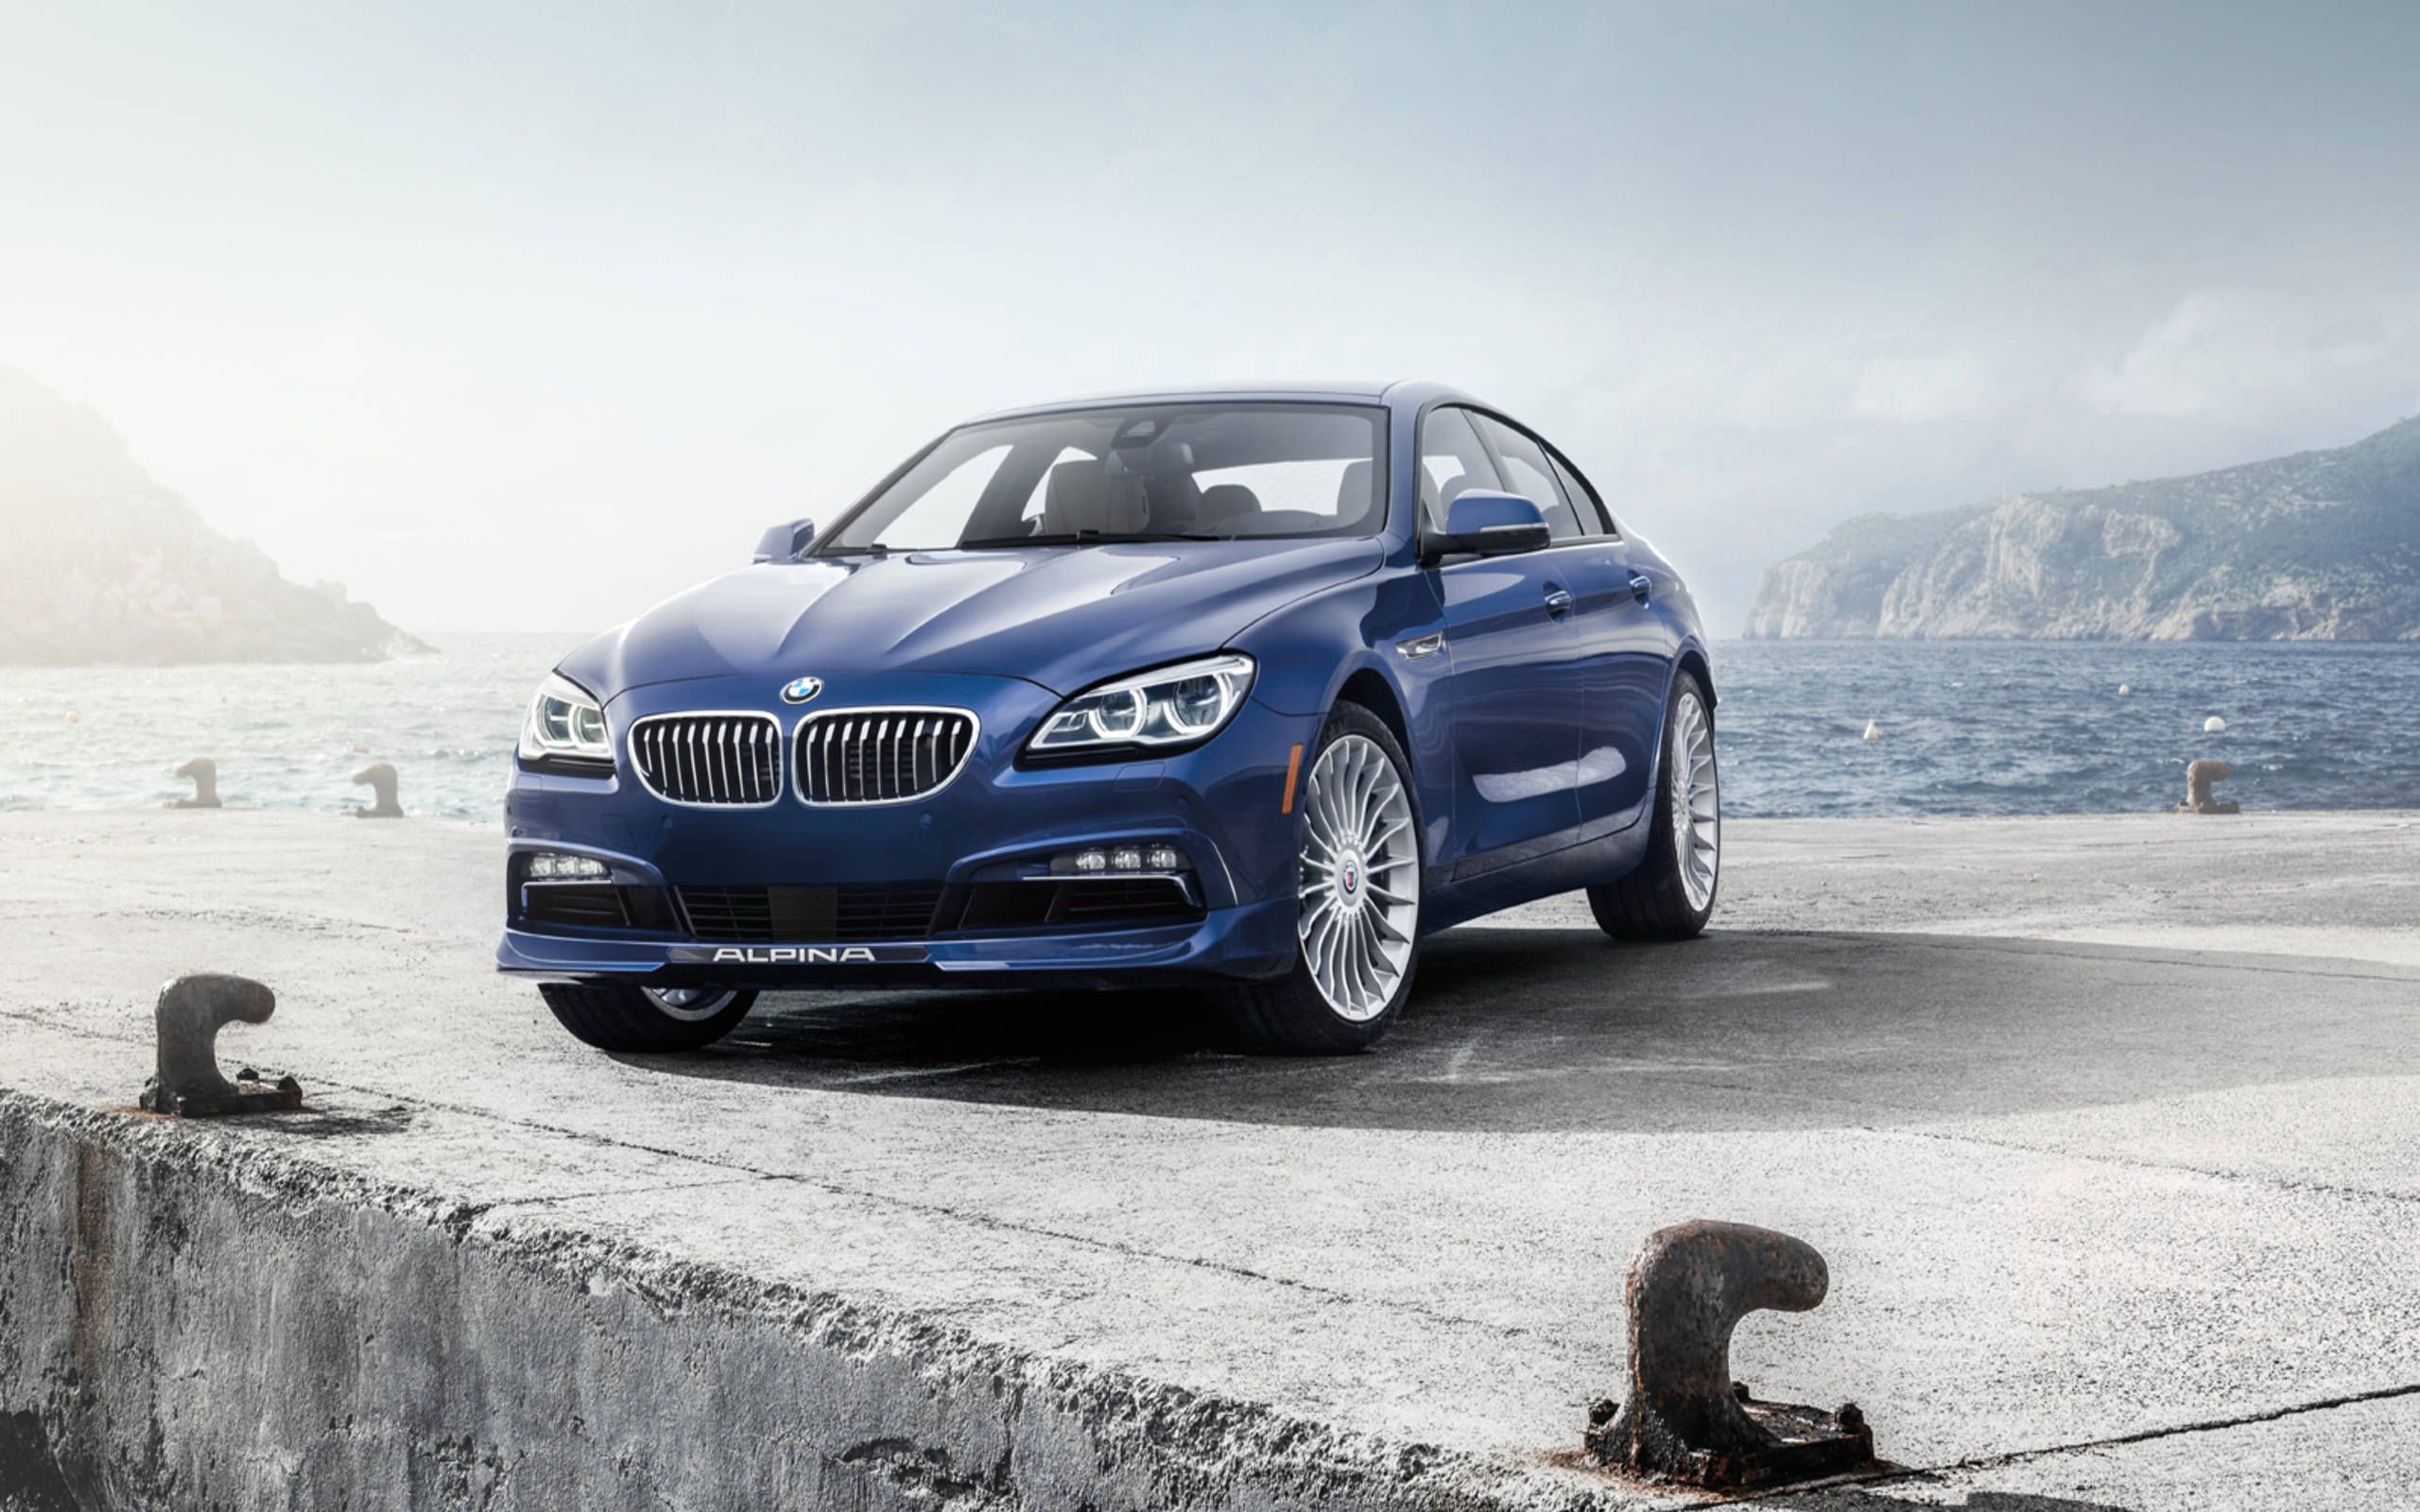 A cut above: 2015 BMW Alpina B6 Gran Coupe review notes